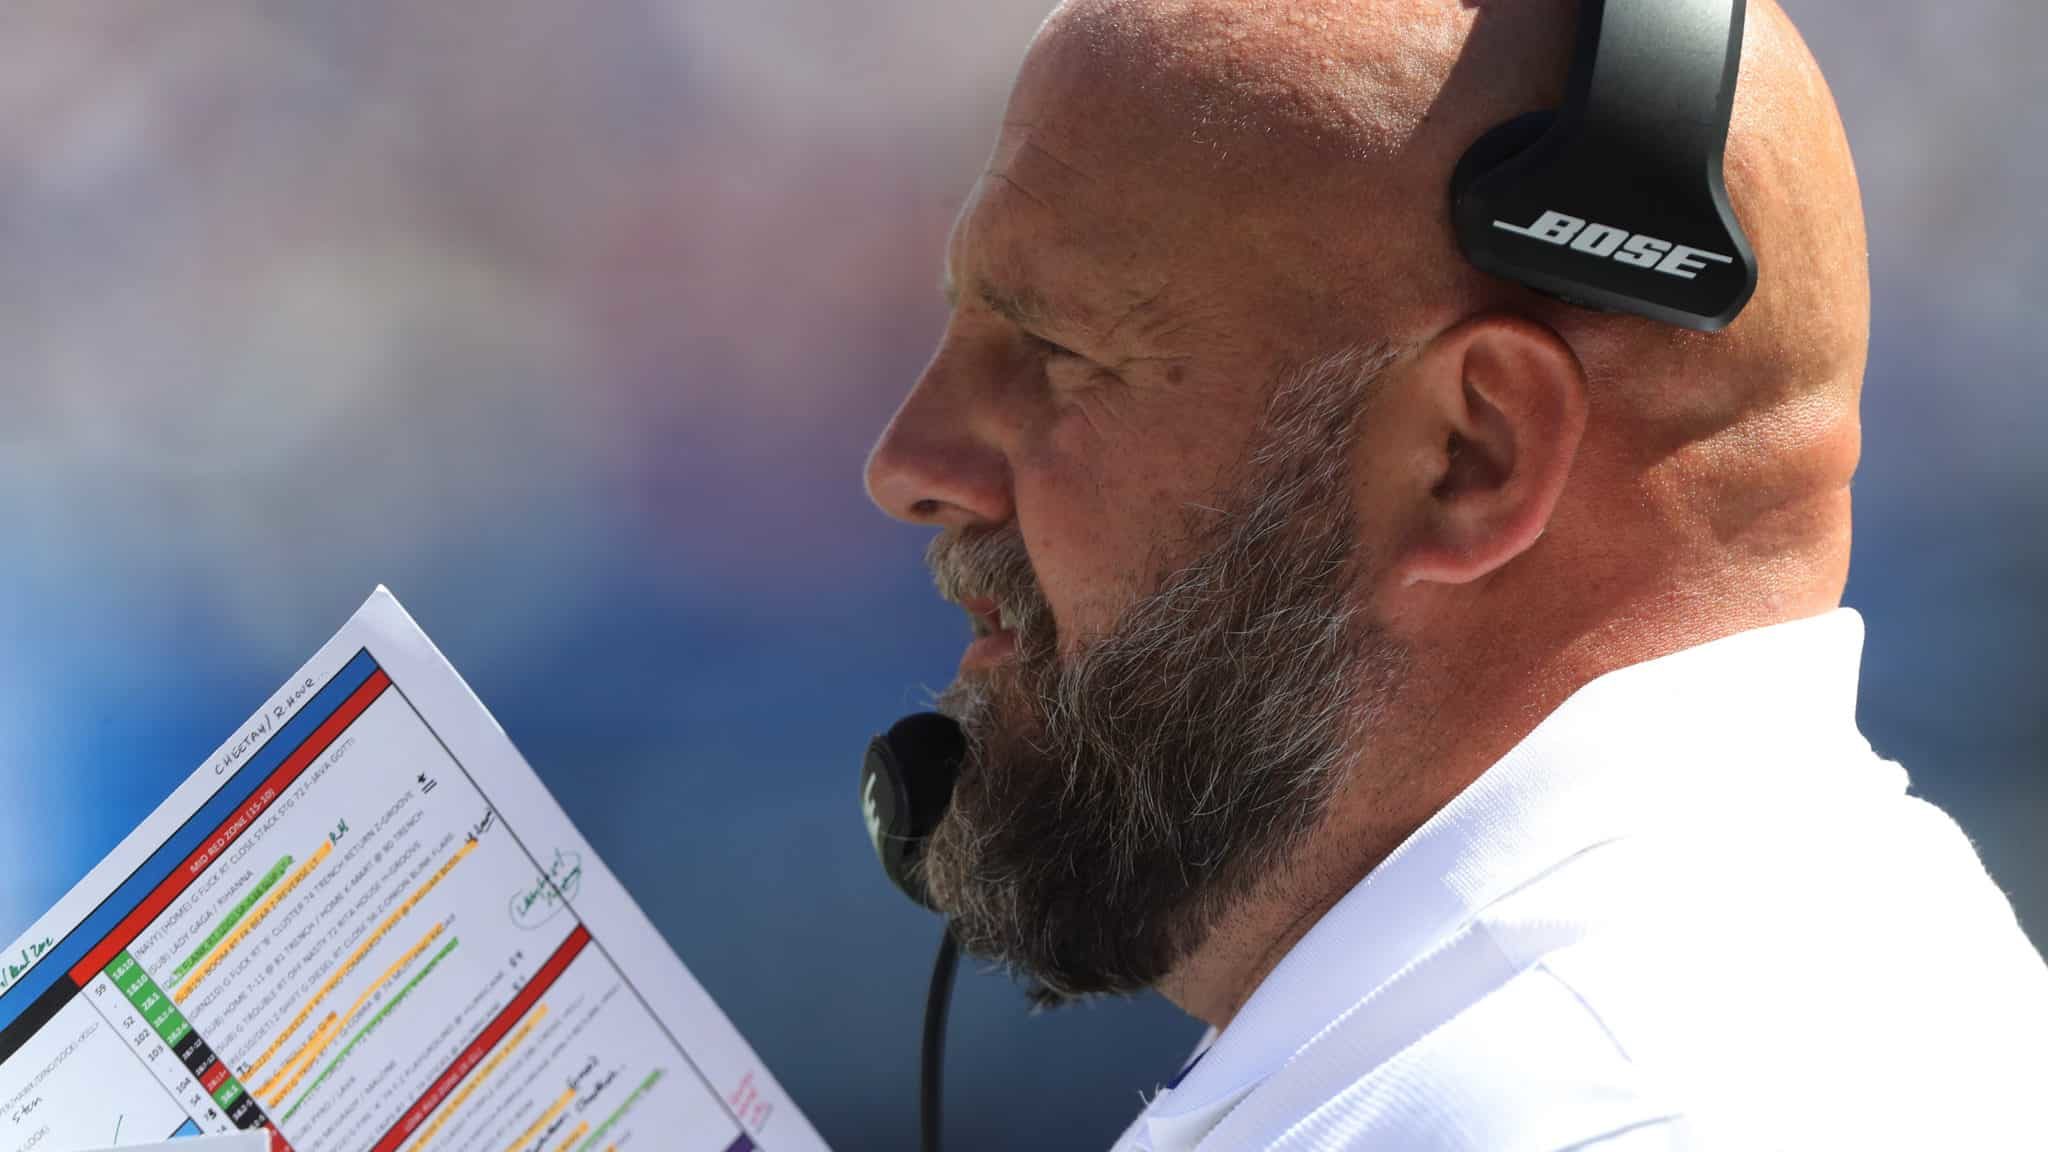 EAST RUTHERFORD, NEW JERSEY - SEPTEMBER 15: Offensive Coordinator Brian Daboll of the Buffalo Bills calls a play in the second half against the New York Giants at MetLife Stadium on September 15, 2019 in East Rutherford, New Jersey.